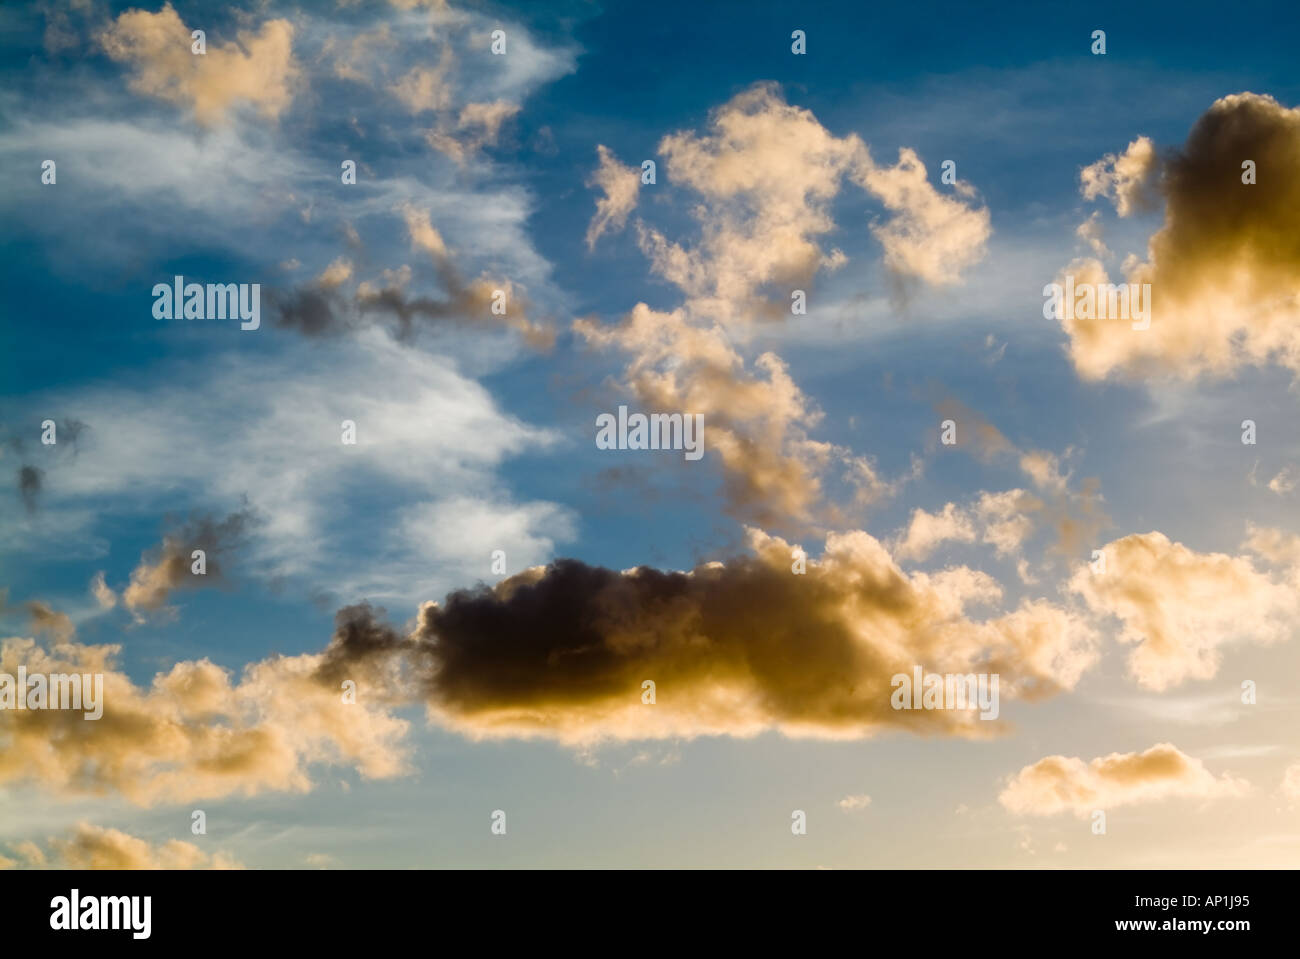 cloudscape old master style sky Stock Photo